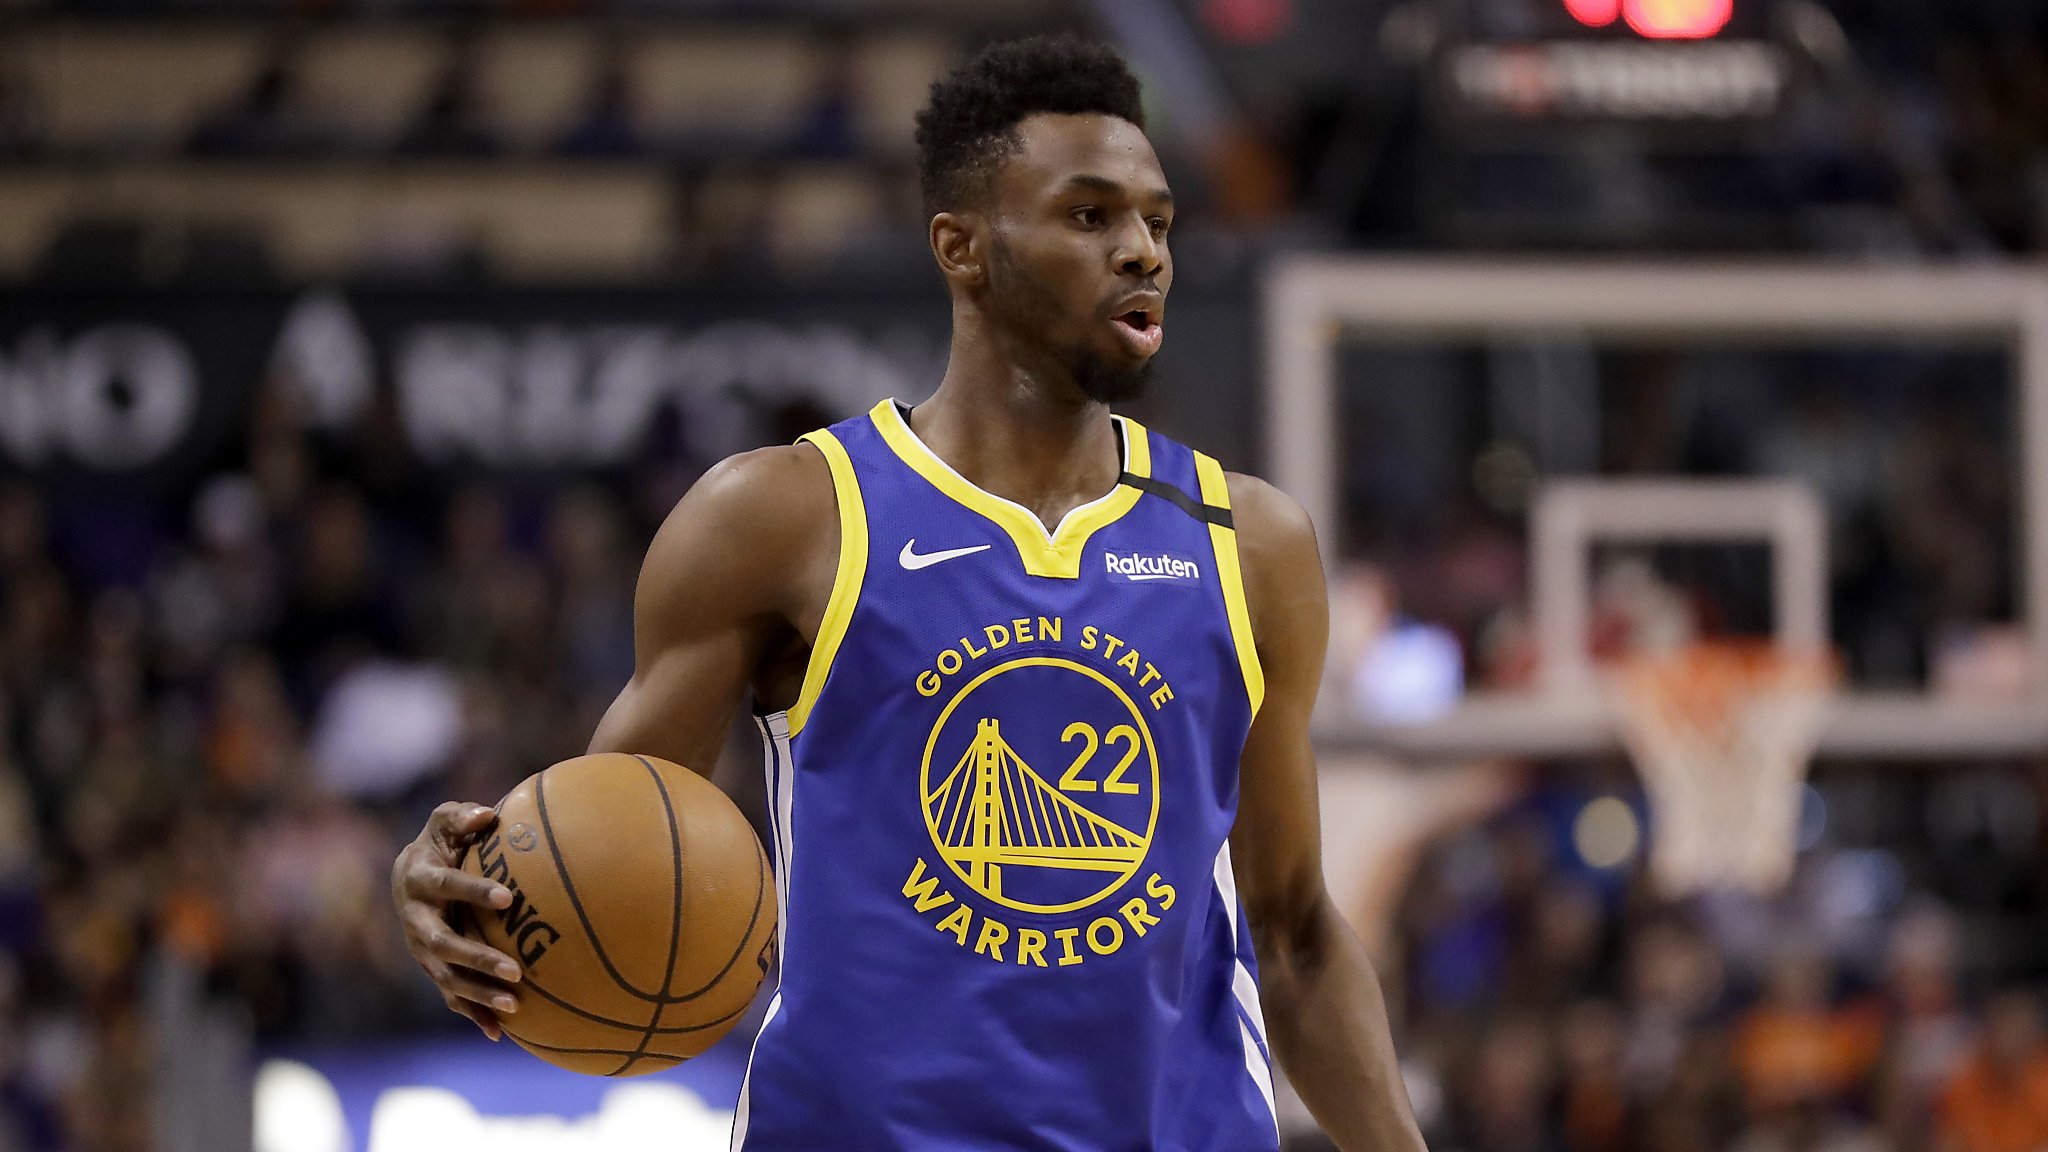 Andrew Wiggins’ play — on offense and defense — has the Warriors excited